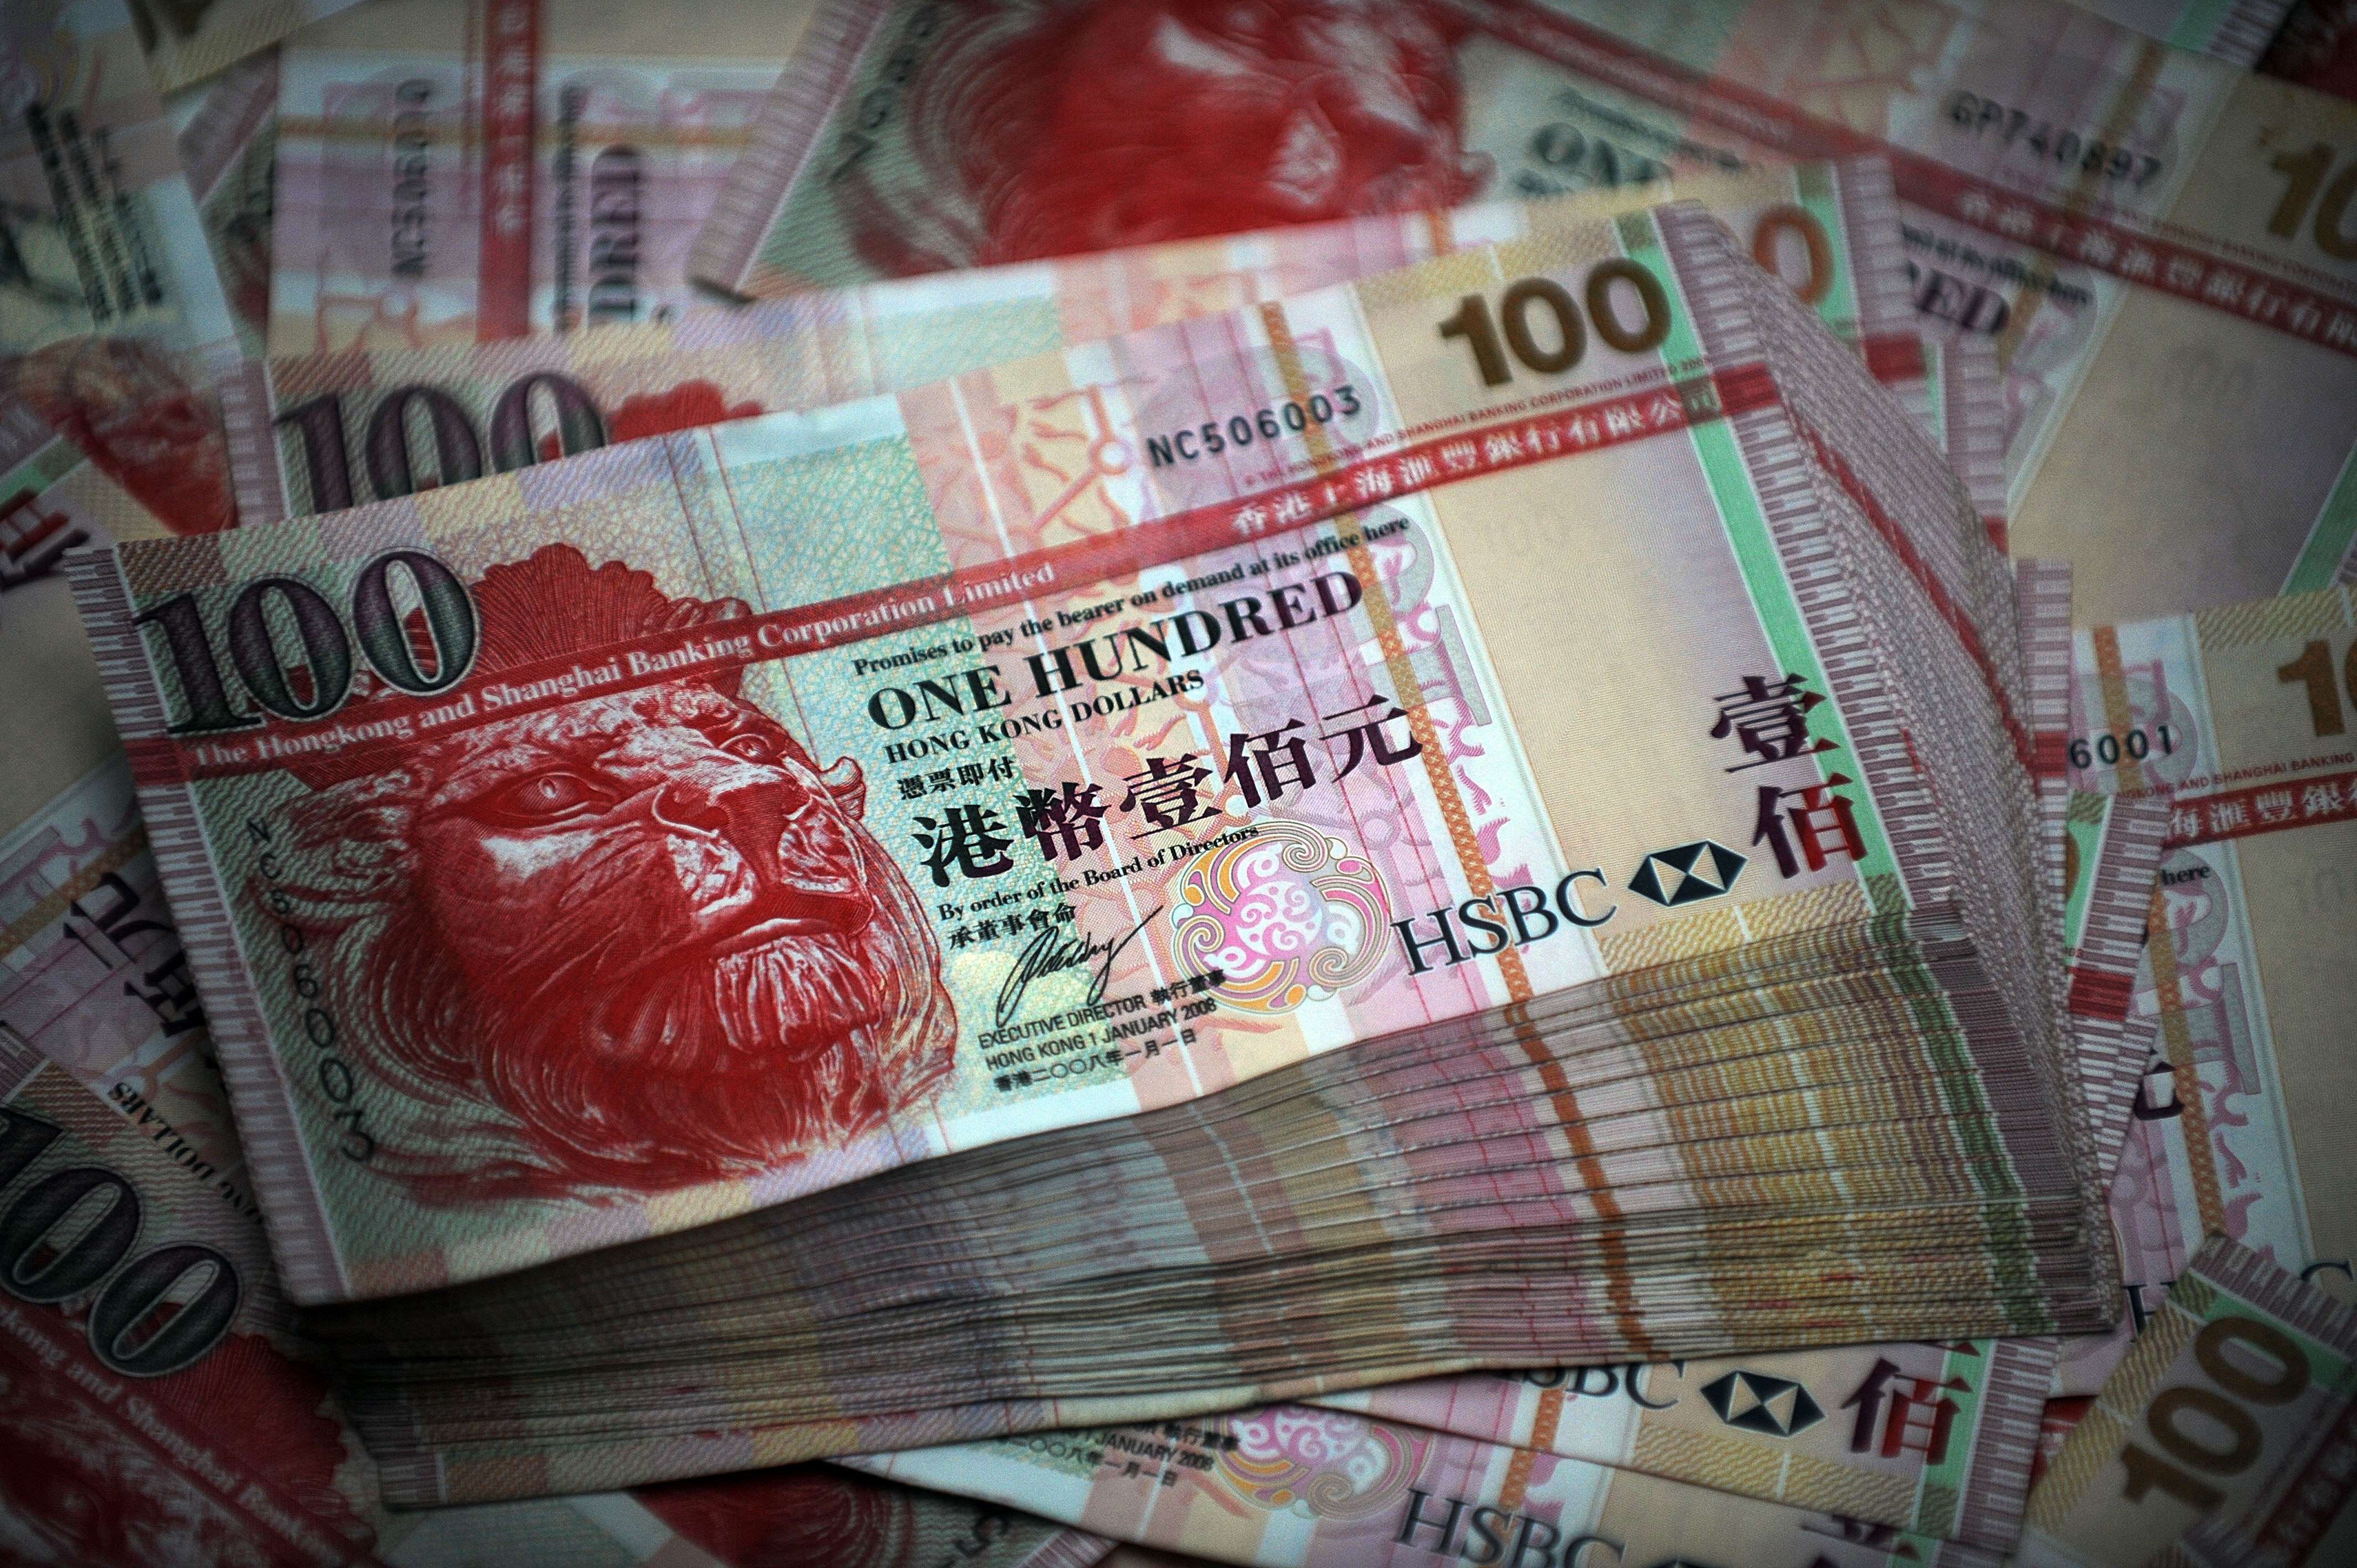 The city’s currency has been loyally linked to the US dollar for 34 years – but again that’s being questioned. Could the renminbi now become a more likely new partner?